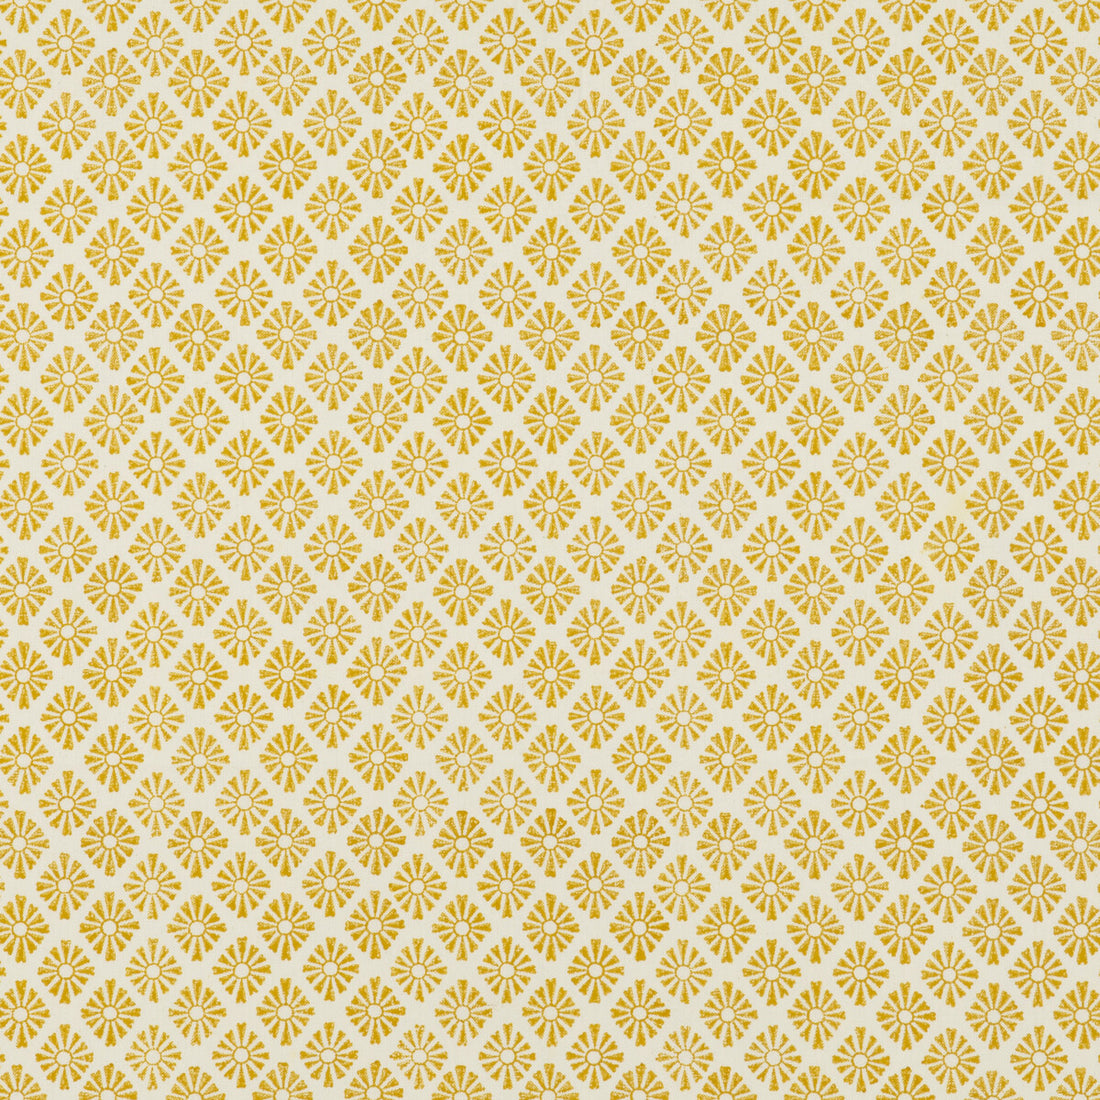 Sunburst fabric in yellow color - pattern PP50476.4.0 - by Baker Lifestyle in the Fiesta collection